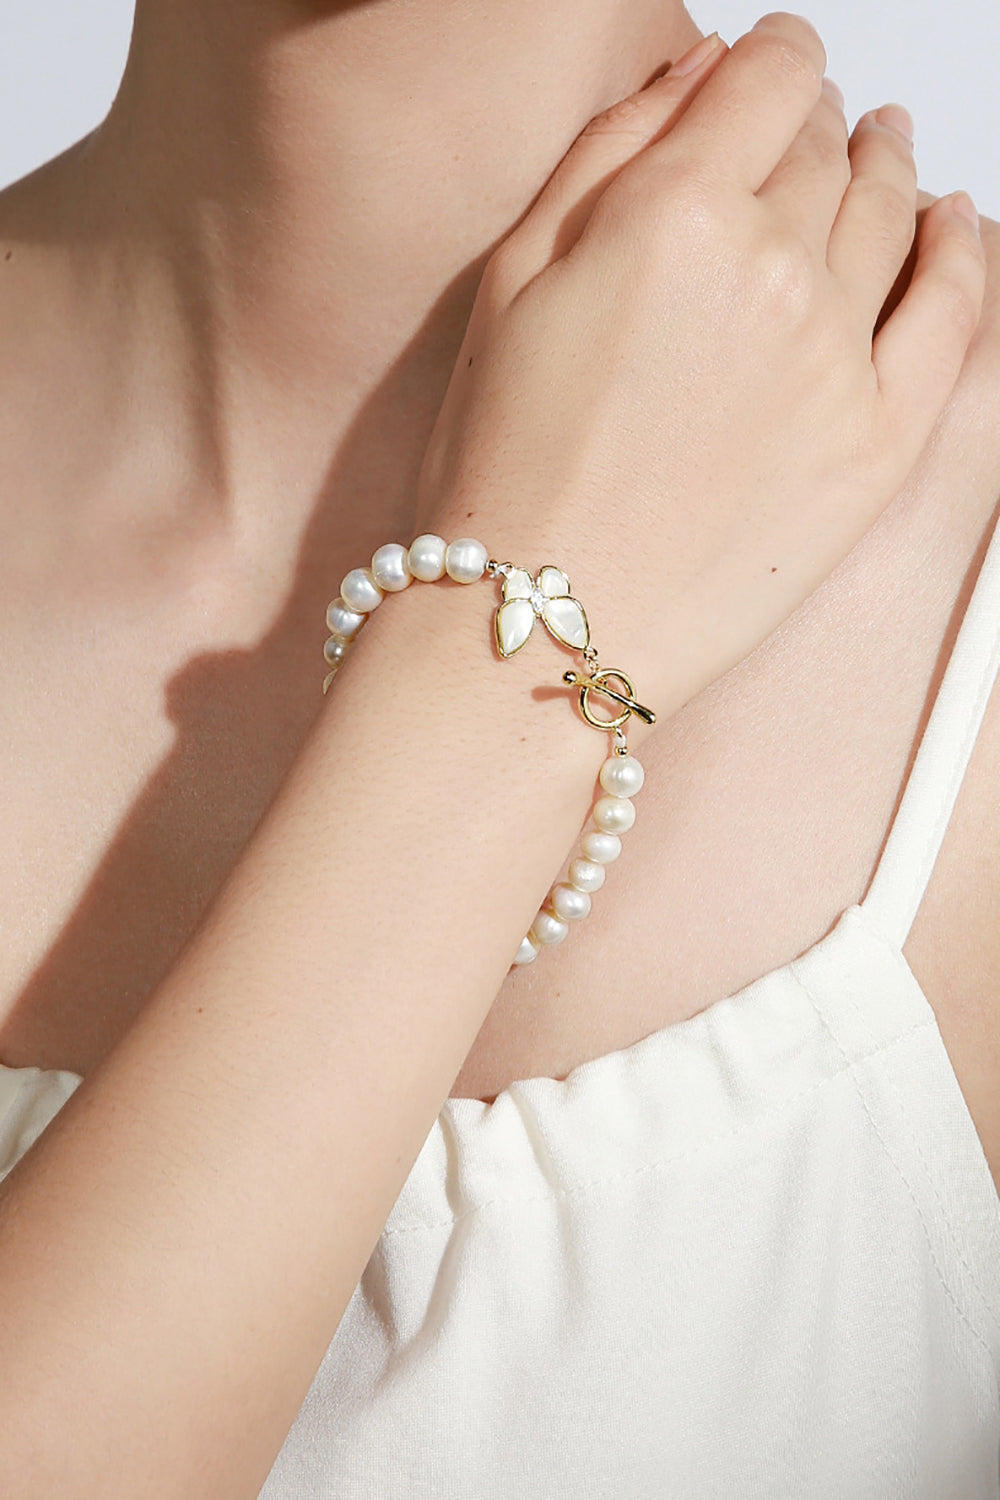 Sparkly White Pearl Stretch Bracelet with Butterfly